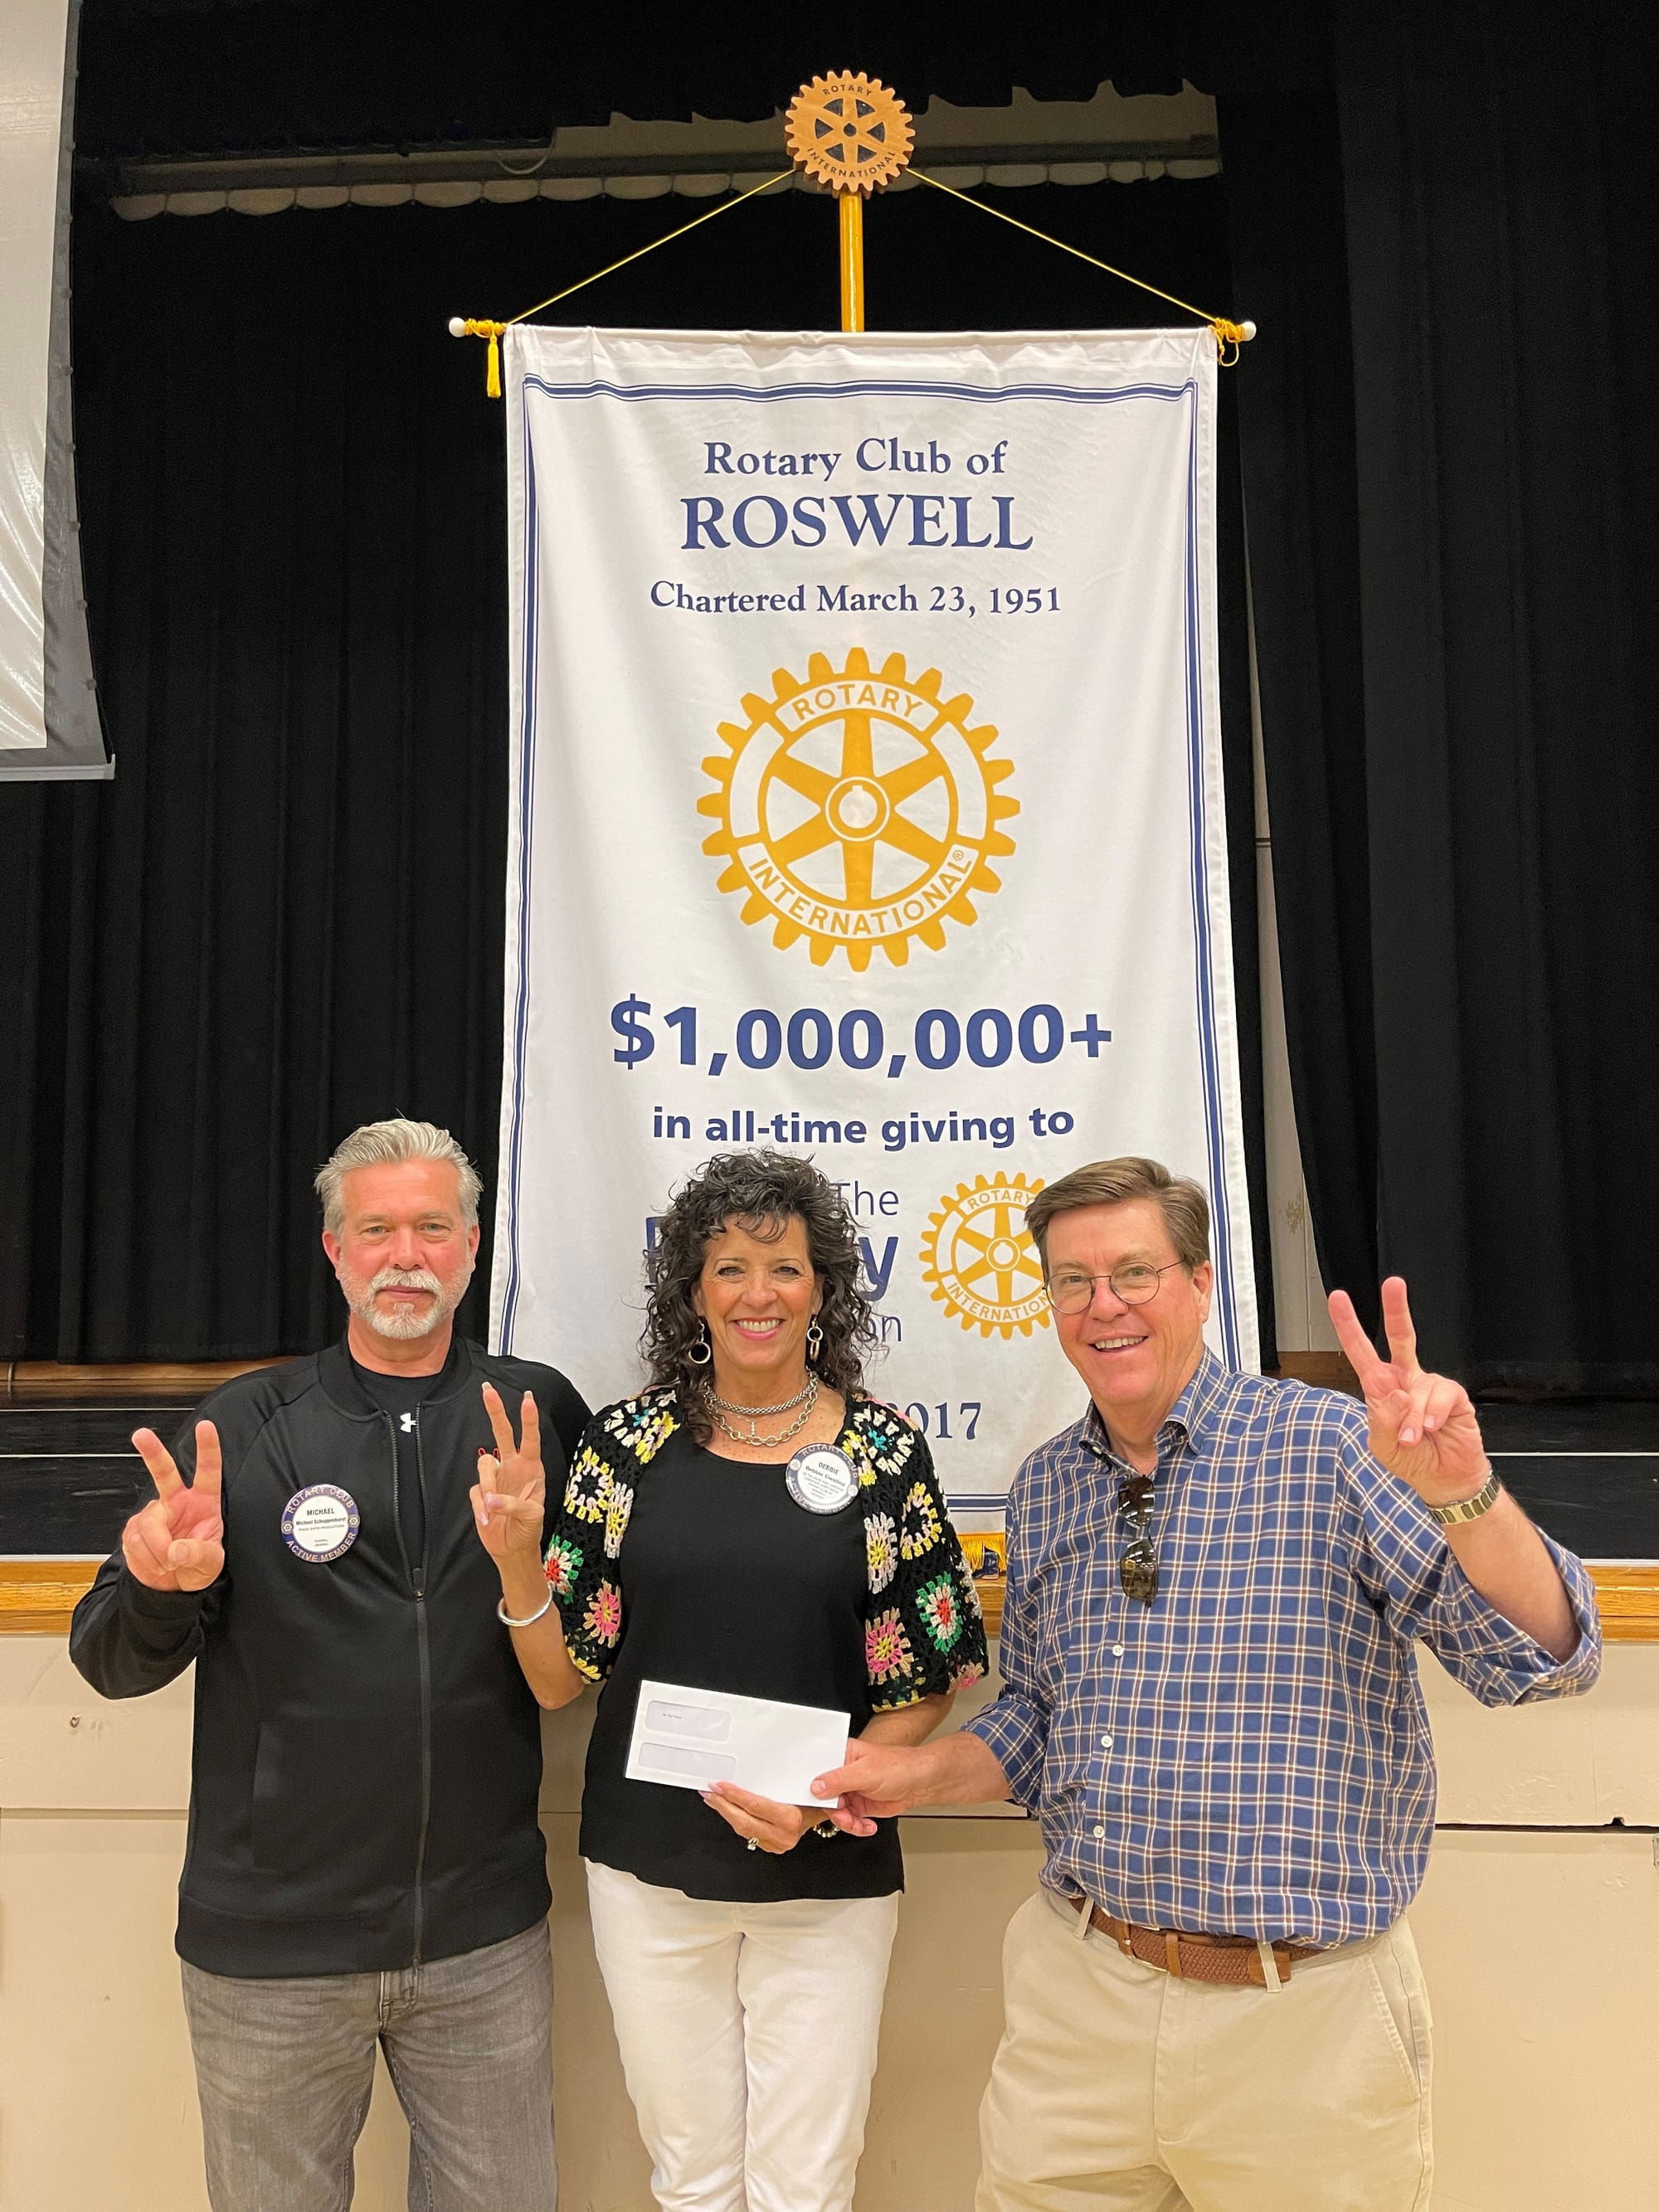 Thanks Rotary Club of Roswell!